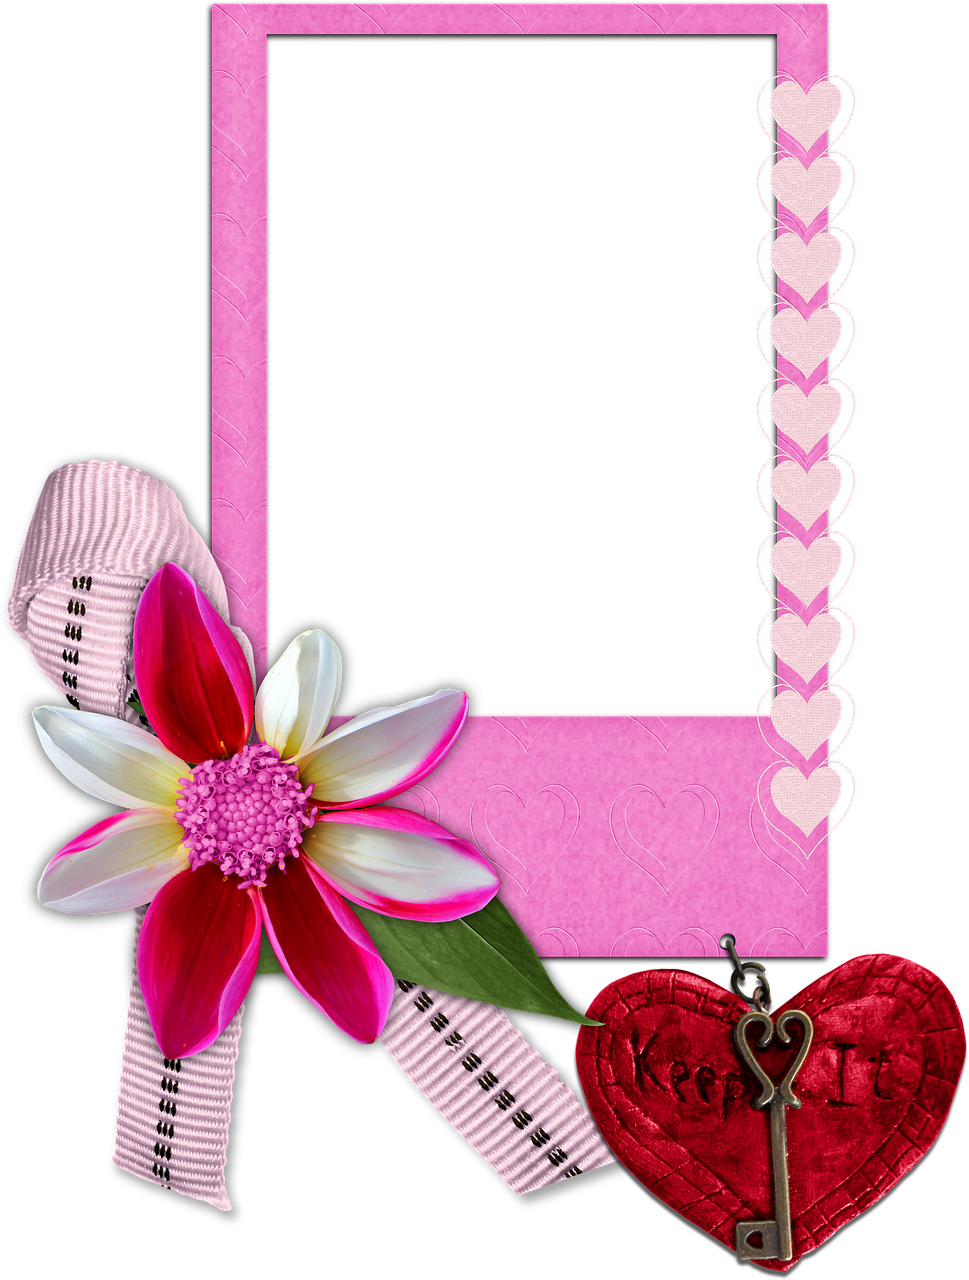 a picture frame with a heart and a flower, inspired by Lucette Barker, pink accents, kdp, looking from side!, ribbons and flowers